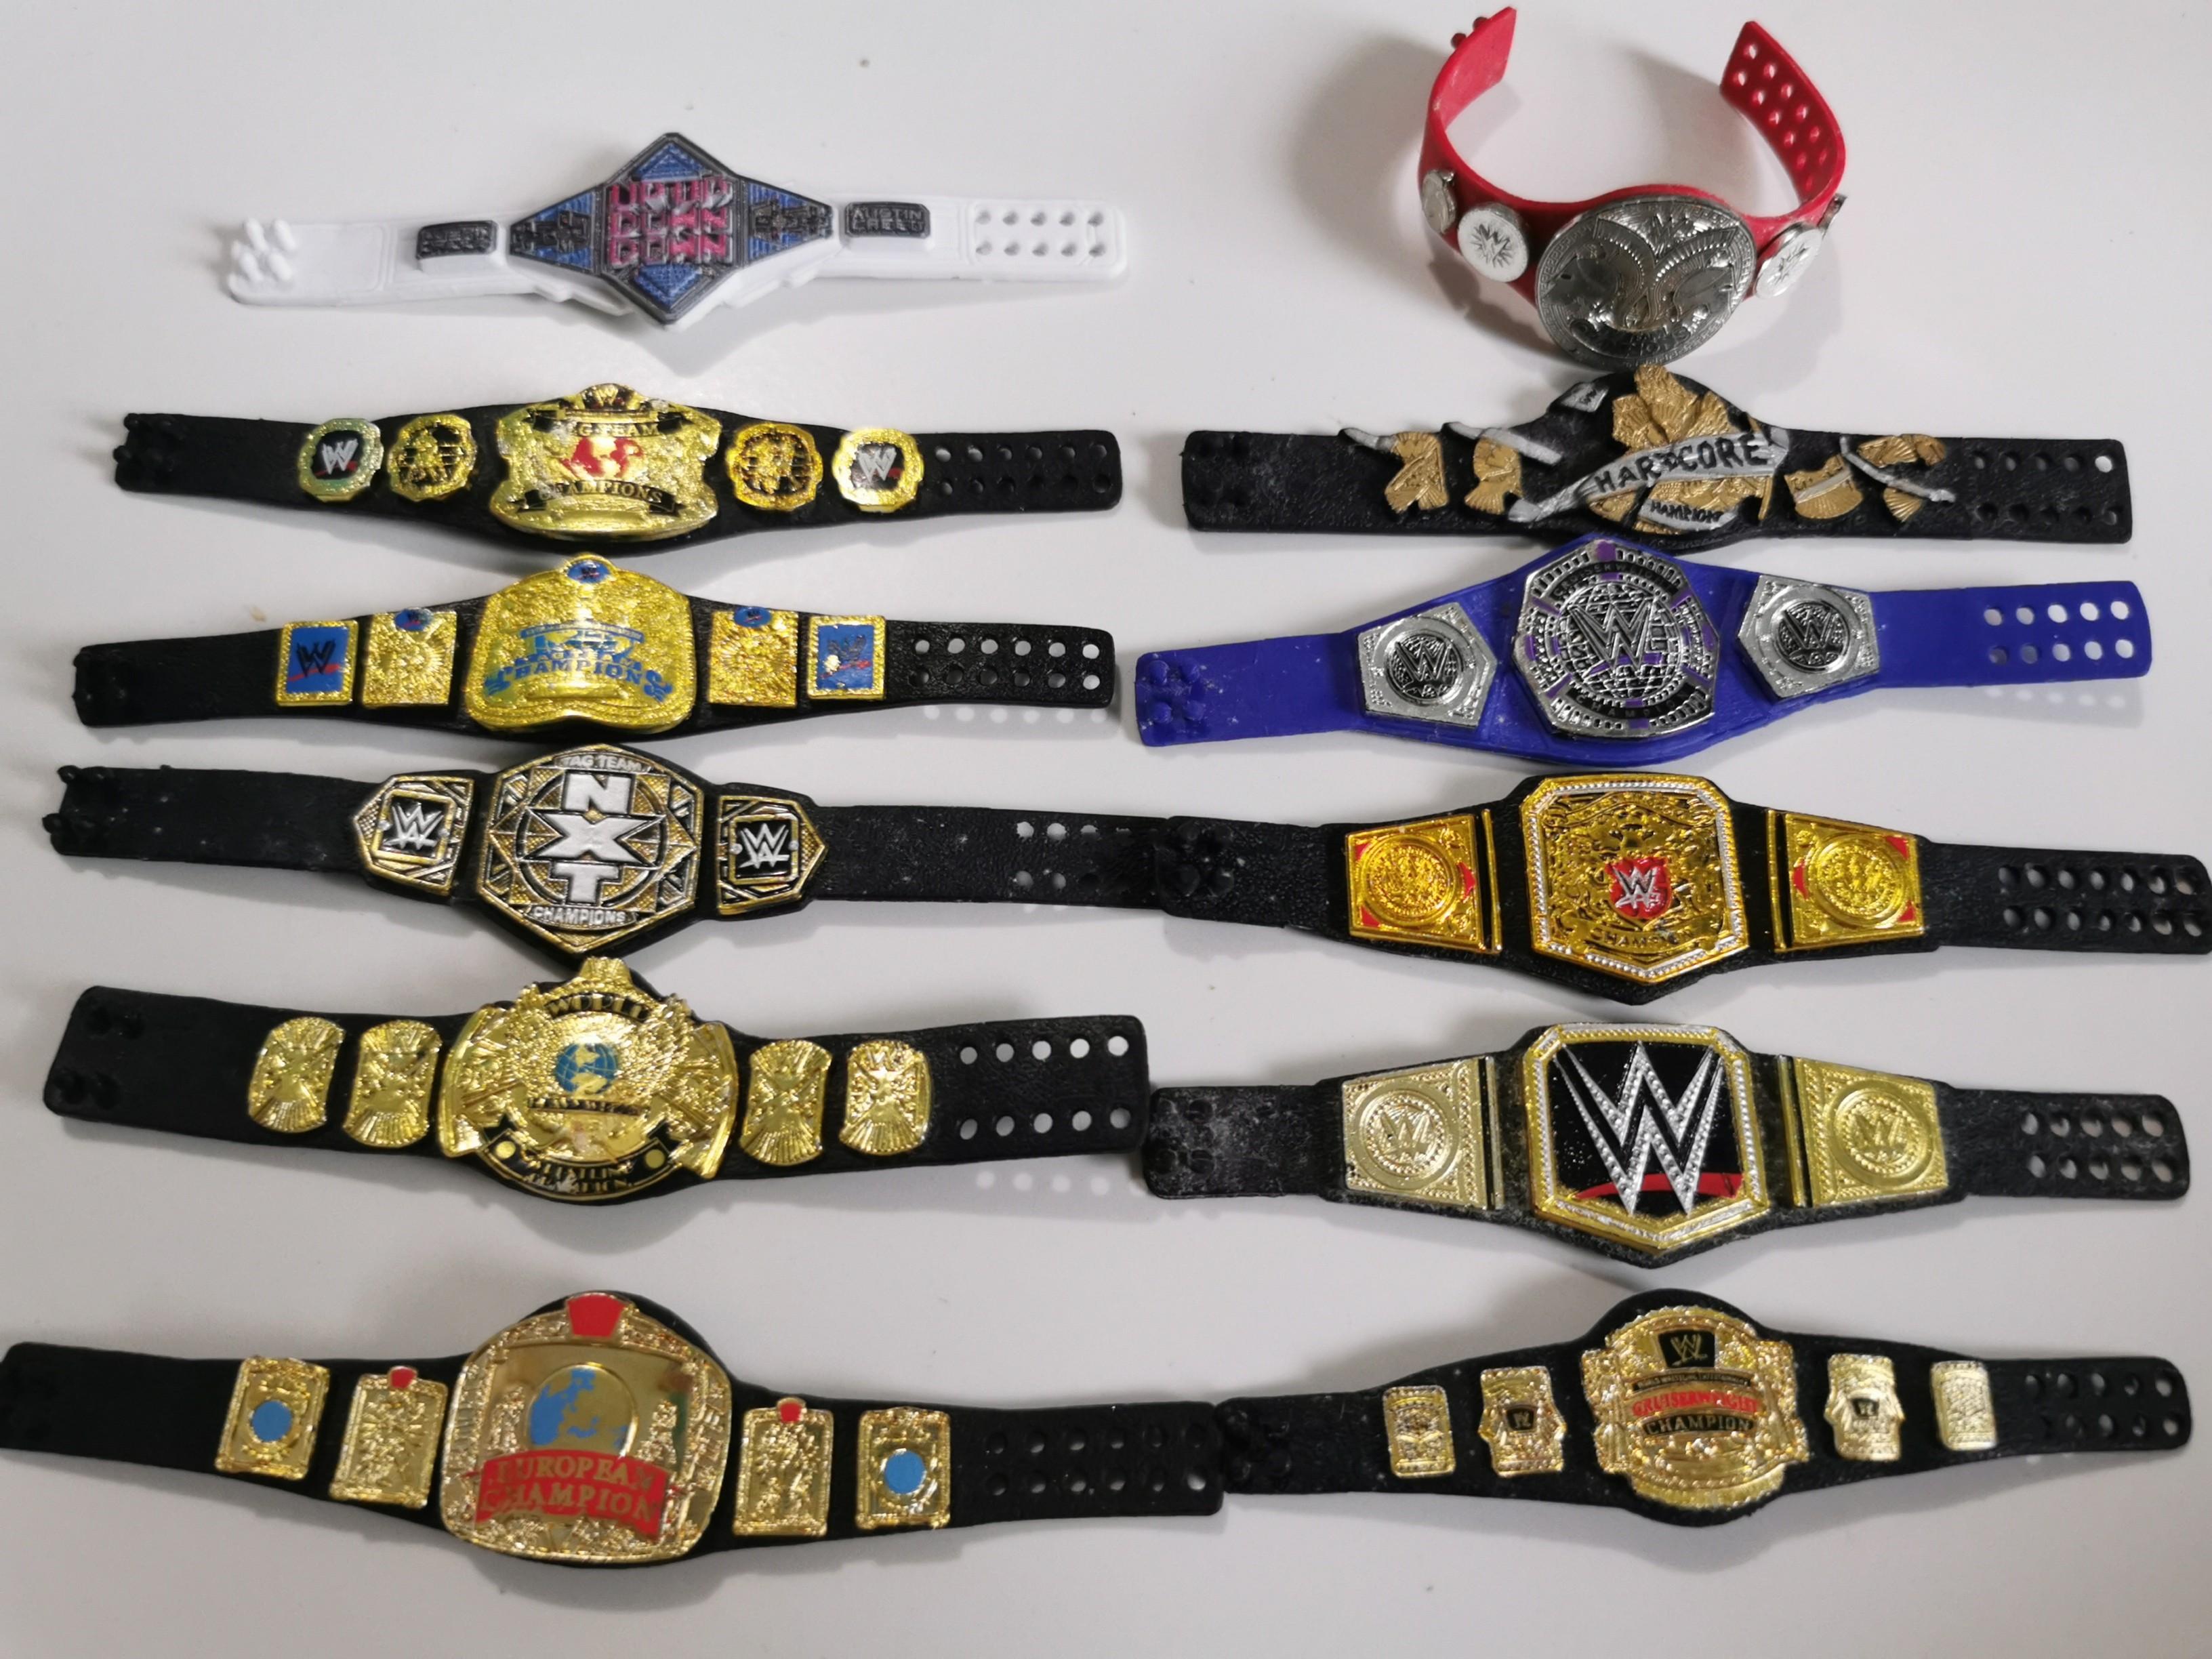 Wwe championship belts for figures, Hobbies & Toys, Toys & Games on ...